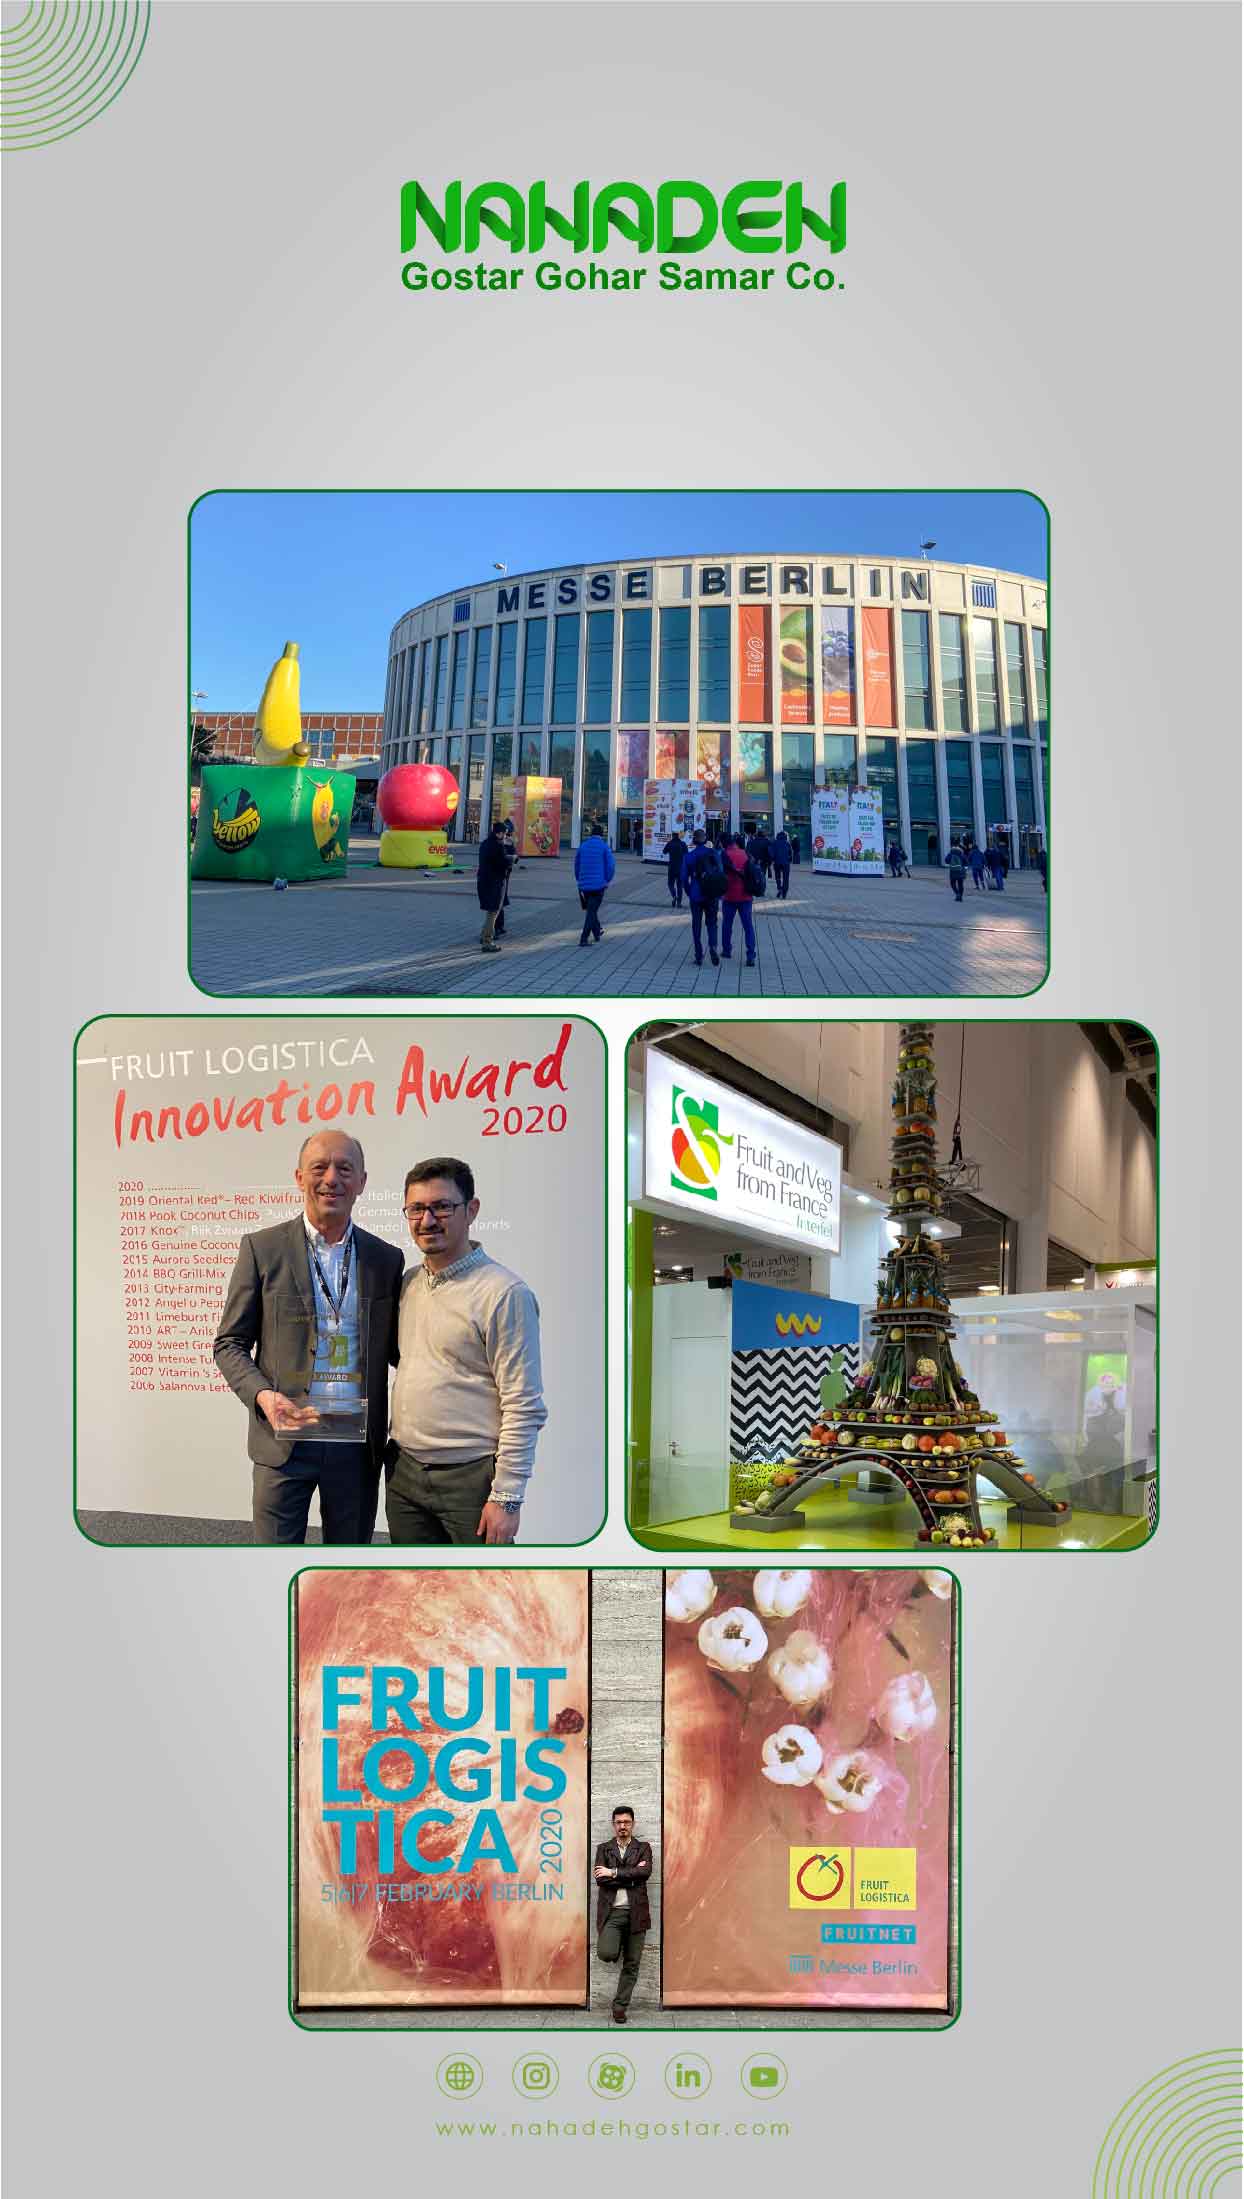 Visiting Fruit Logistics Exhibition in Berlin, Germany 2020 (1)